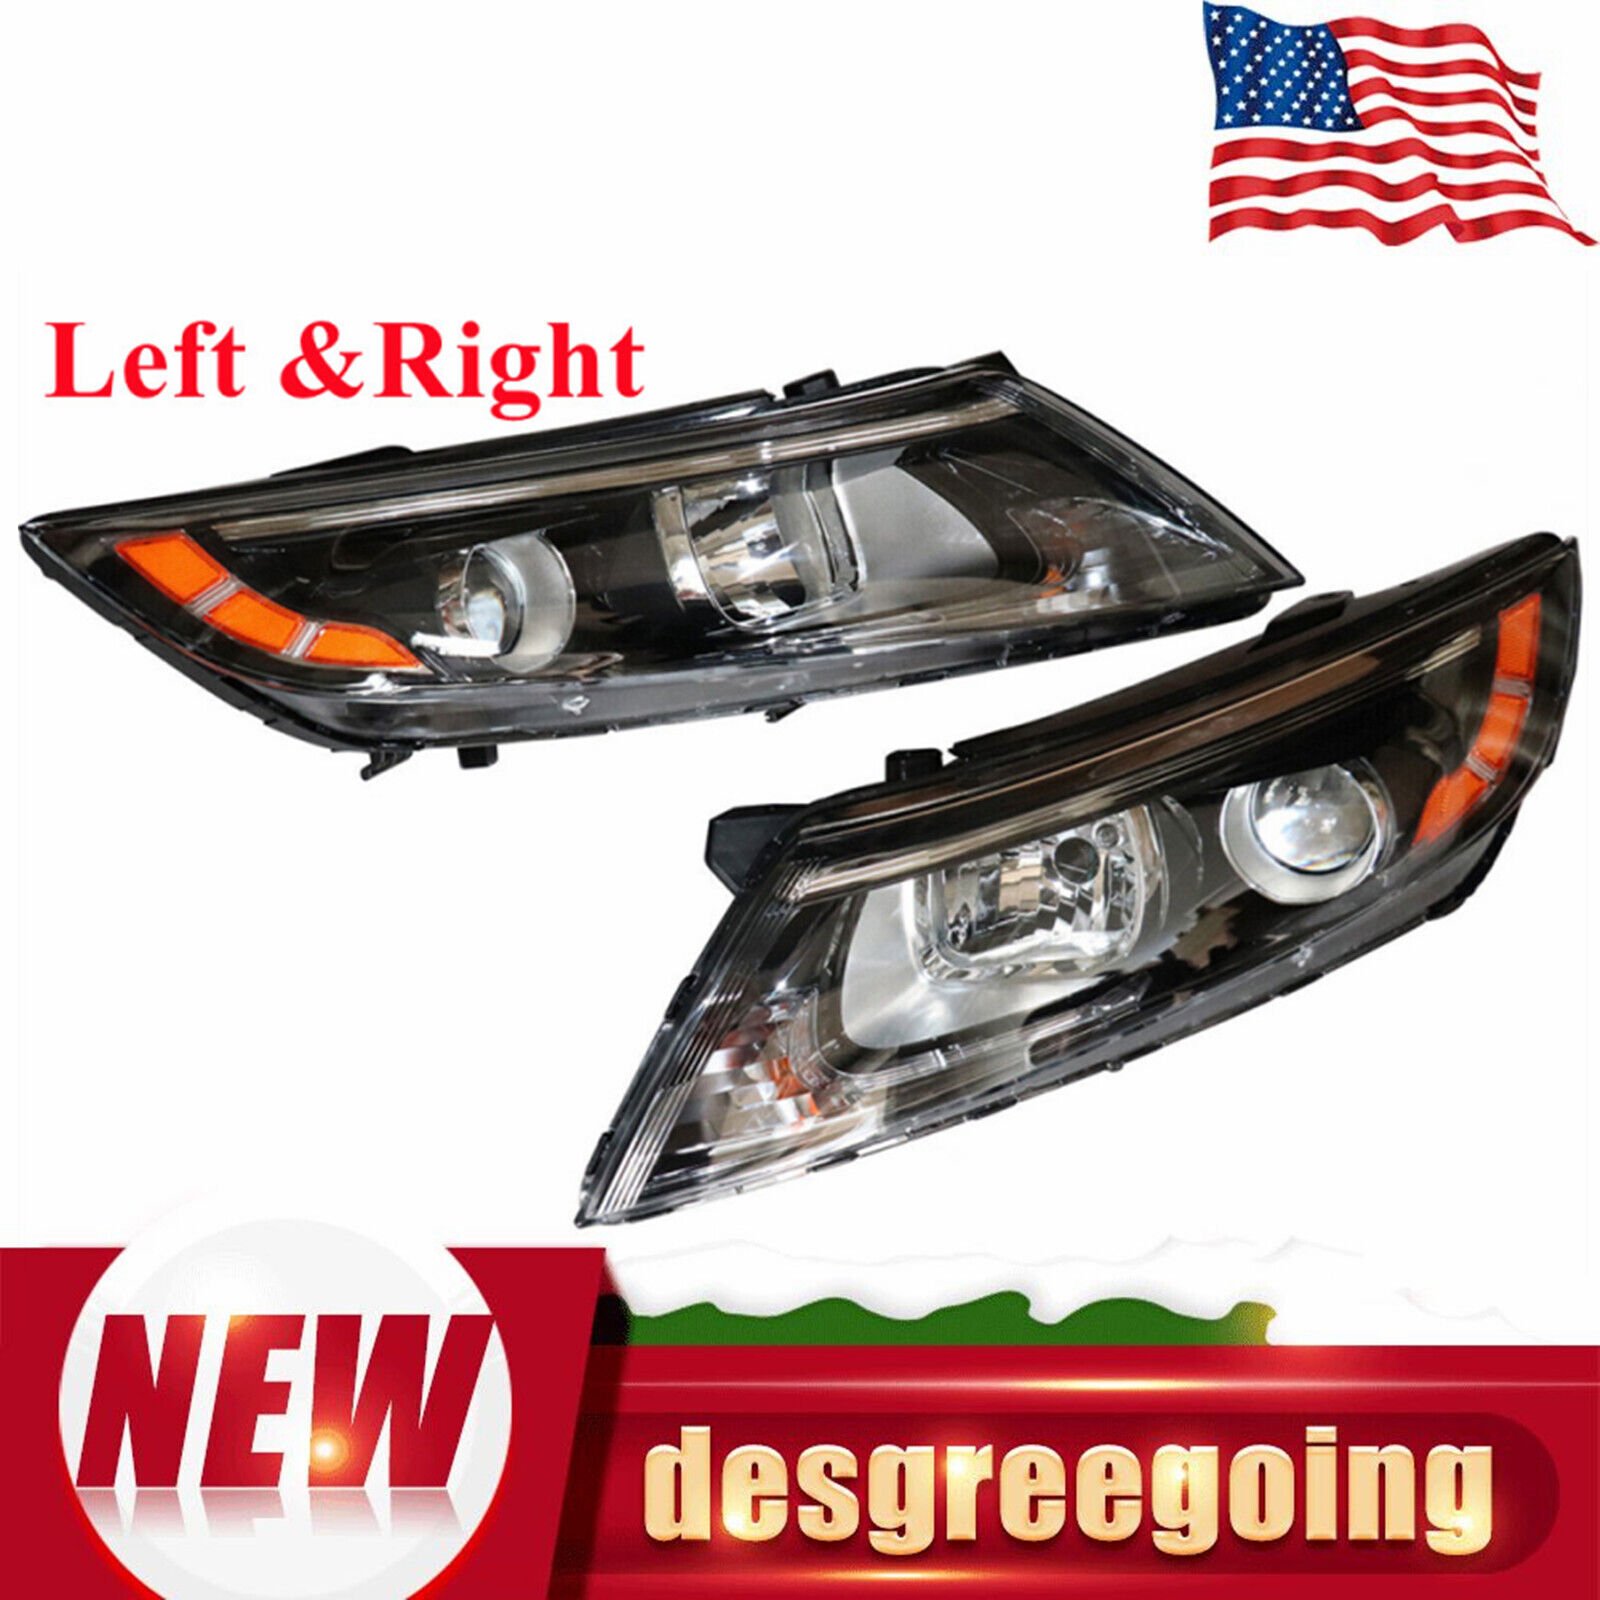 1 Pair Headlight Headlamps Assembly For Kia Optima 2014-2015 Left and Right